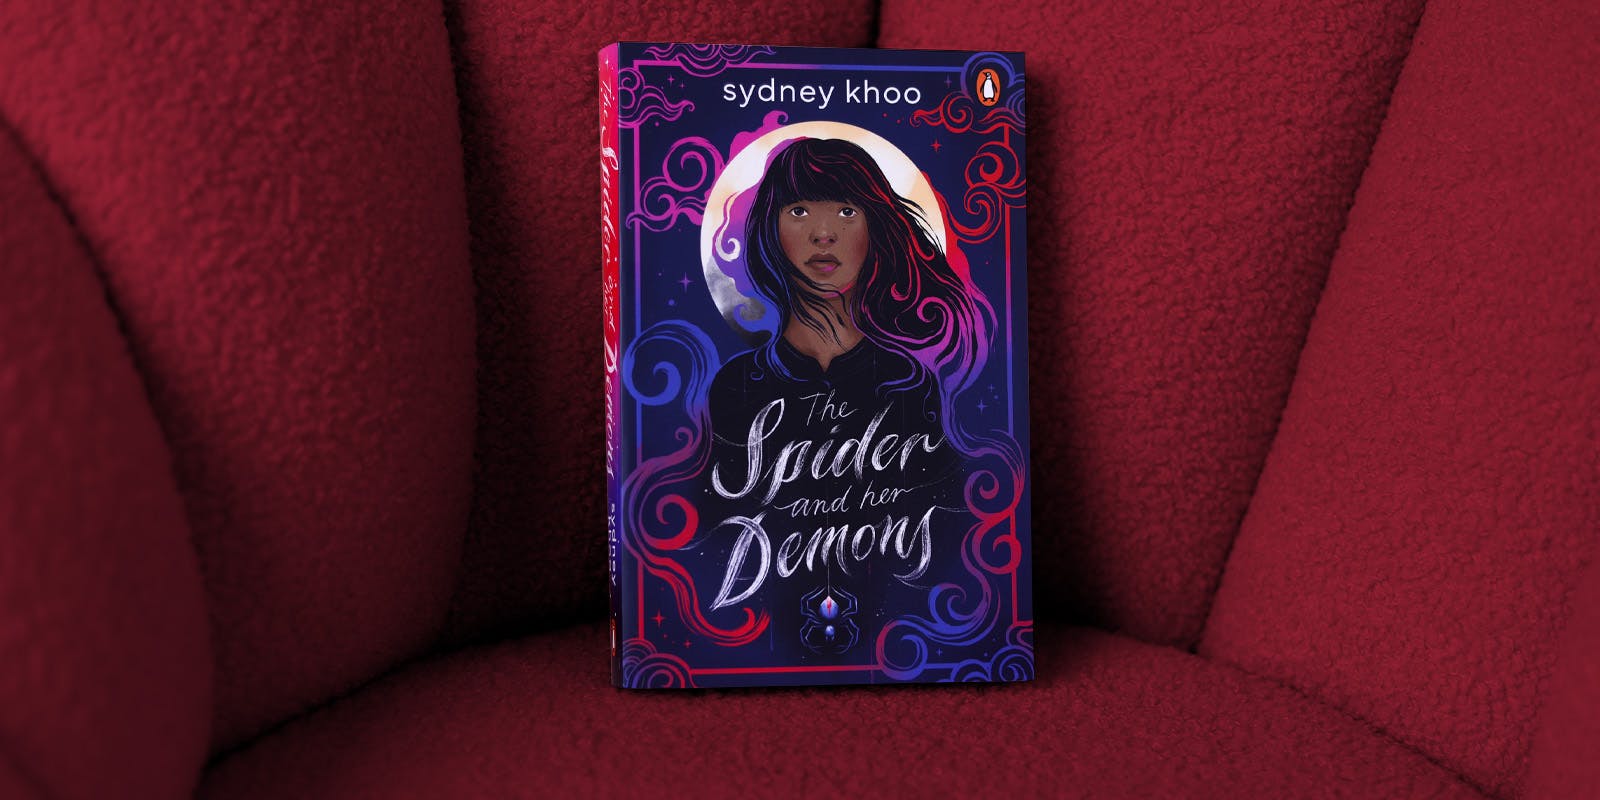 From Write It fellow to published author – sydney khoo’s roundabout path to publication